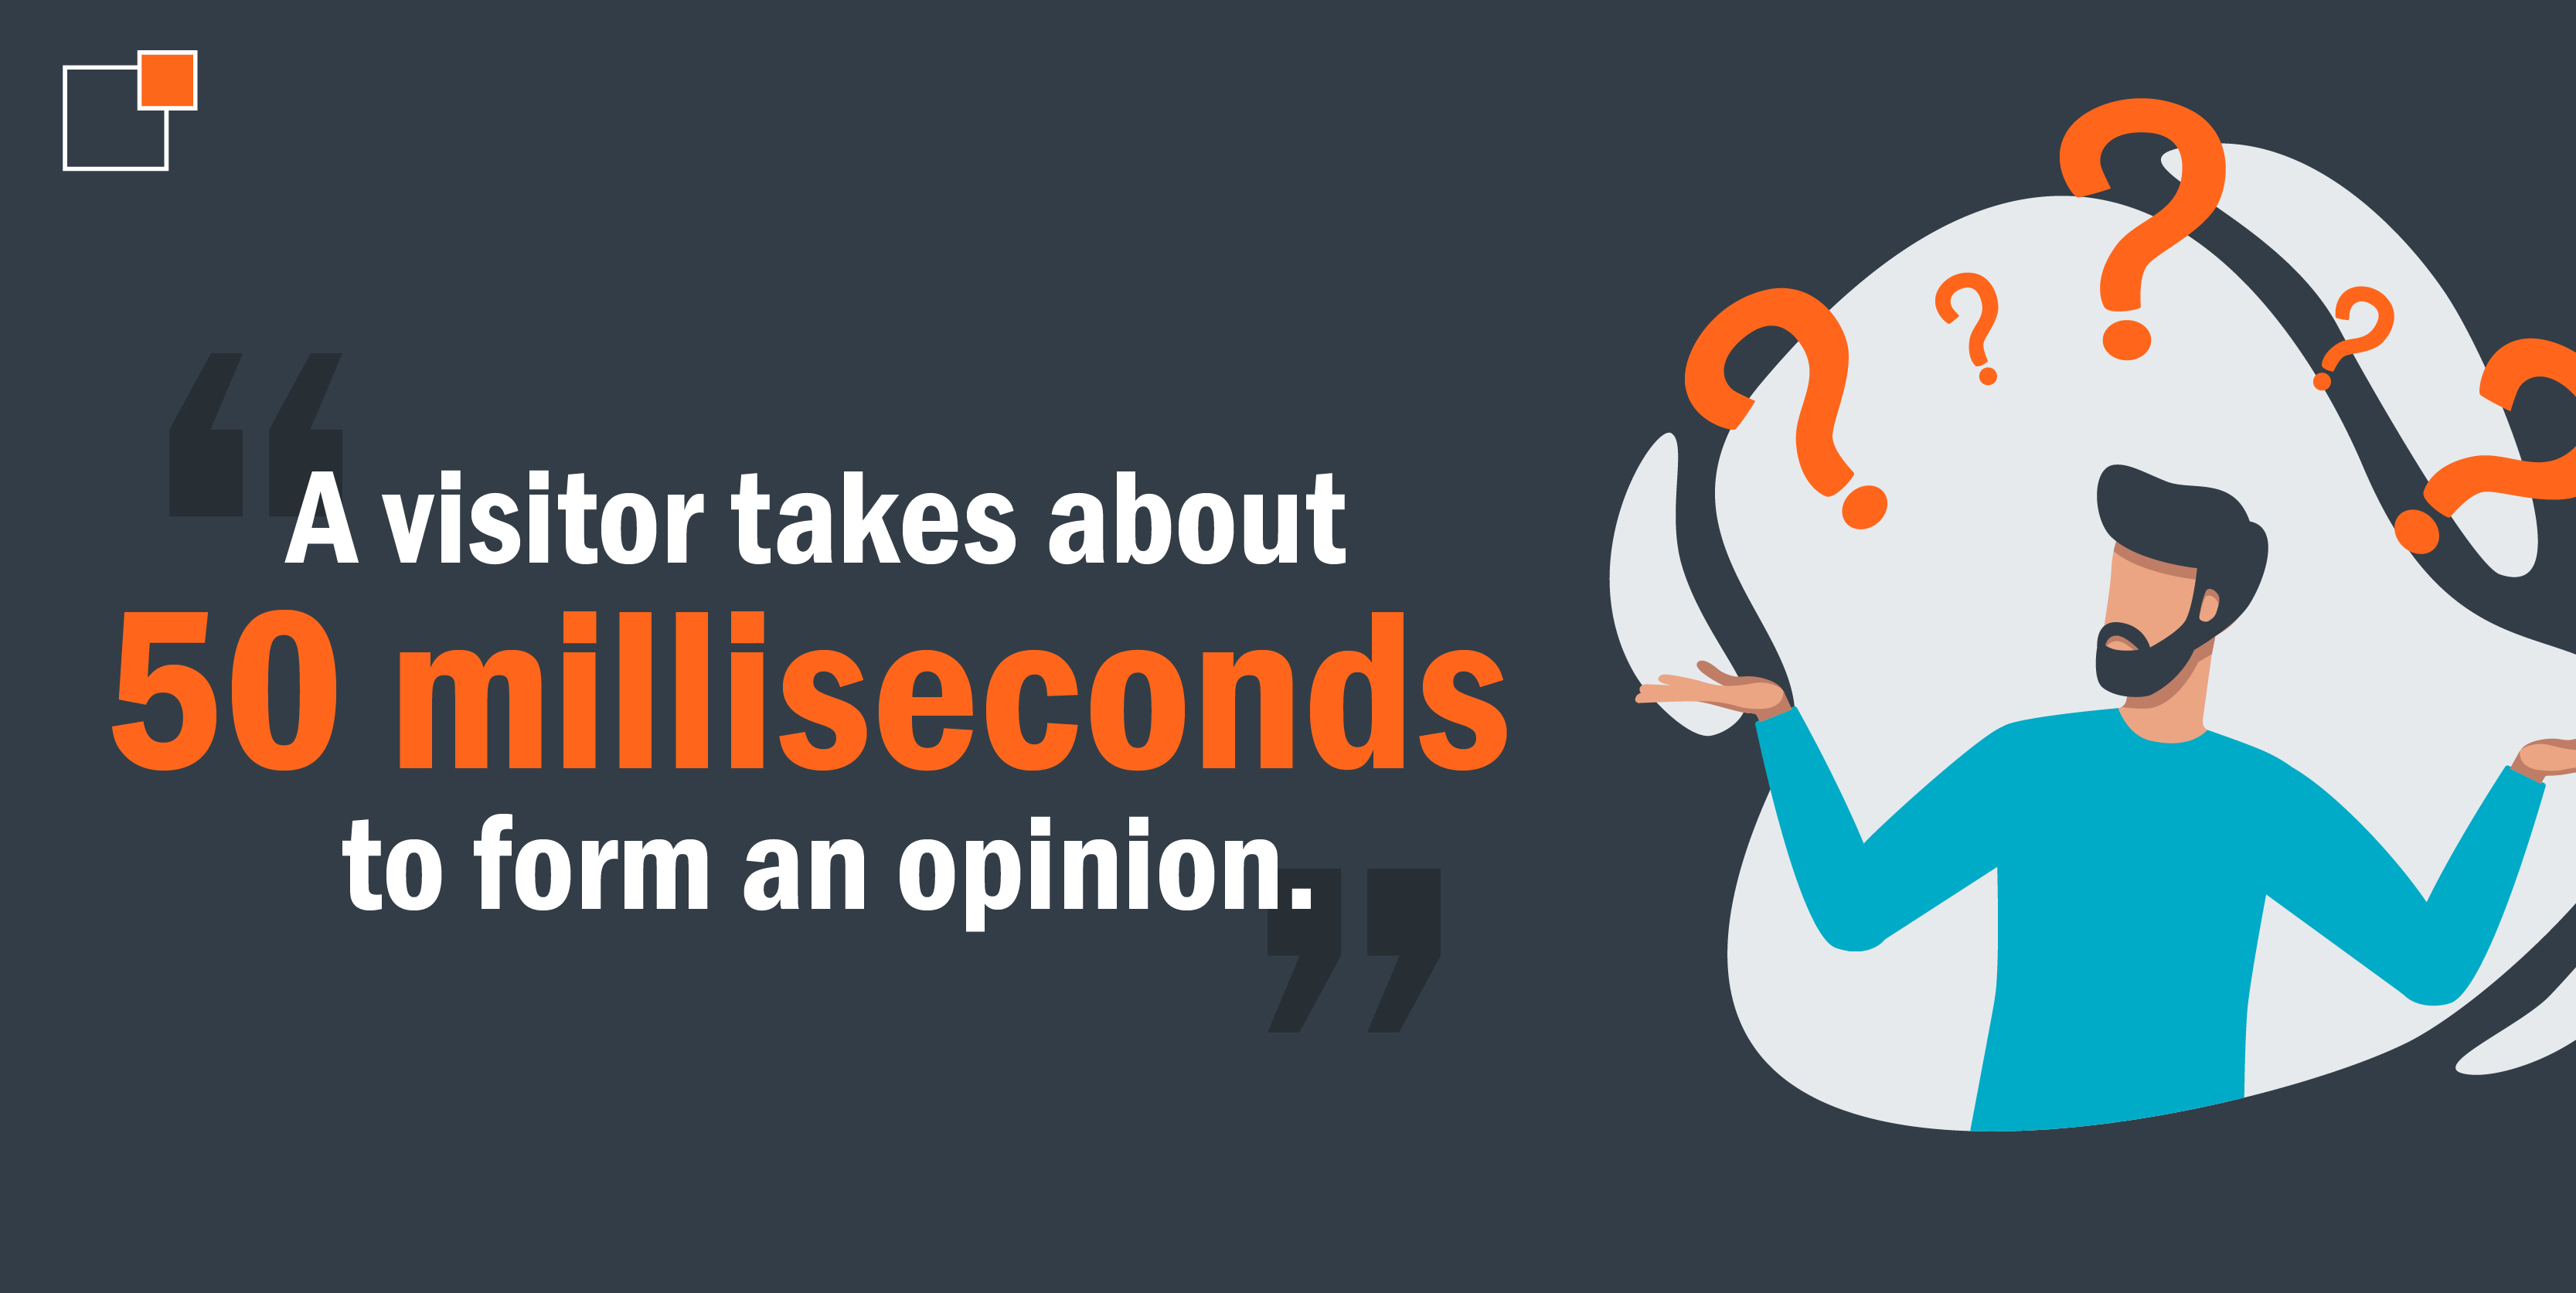 "A visitor takes about 50 milliseconds to form an opinion."